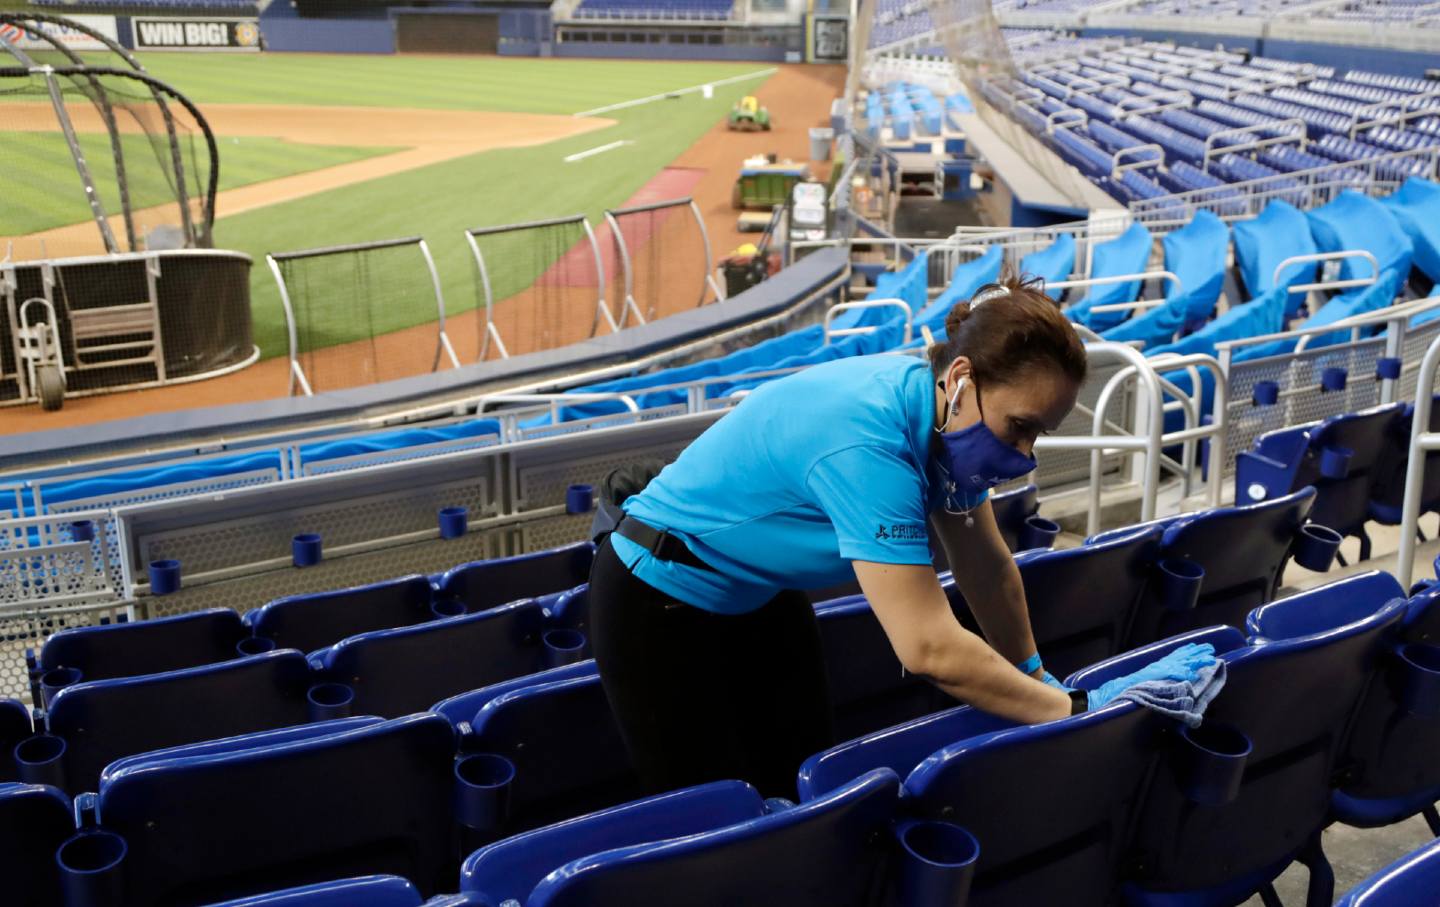 Baseball’s Stadium Workers Are Getting Peanuts From the Billionaire Owners